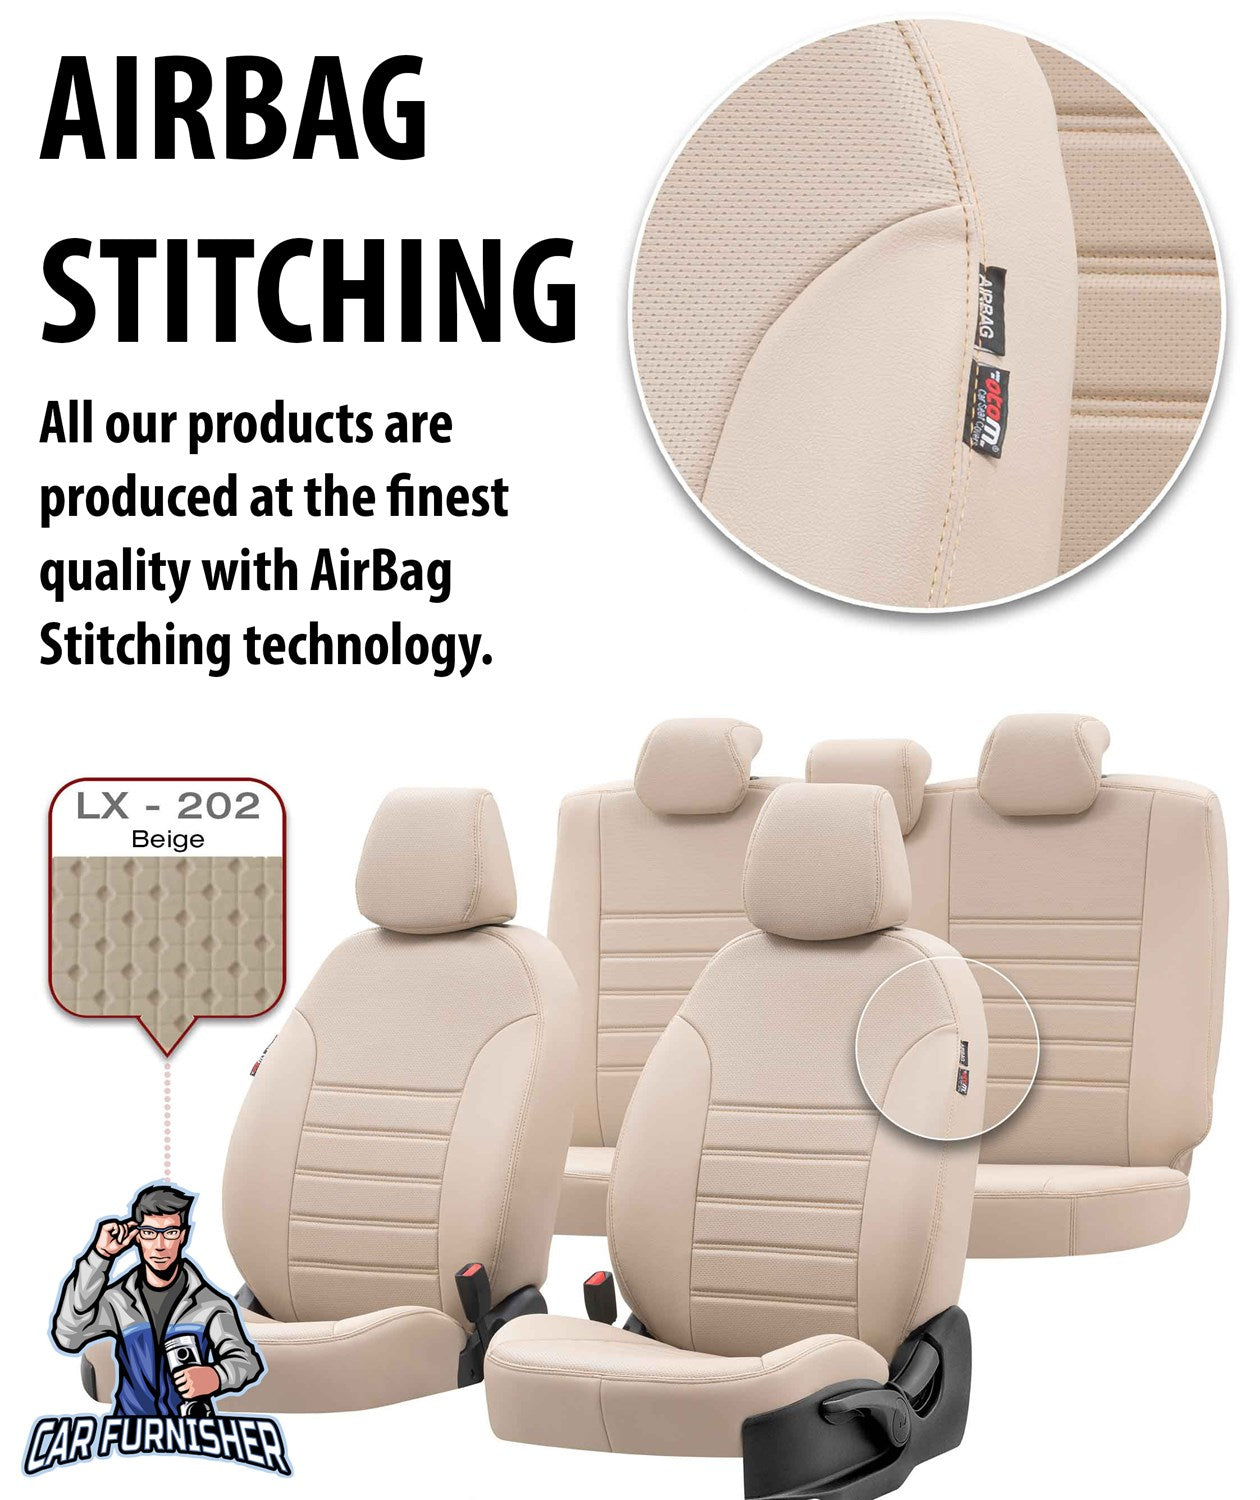 Fiat Doblo Seat Covers New York Leather Design Black Leather